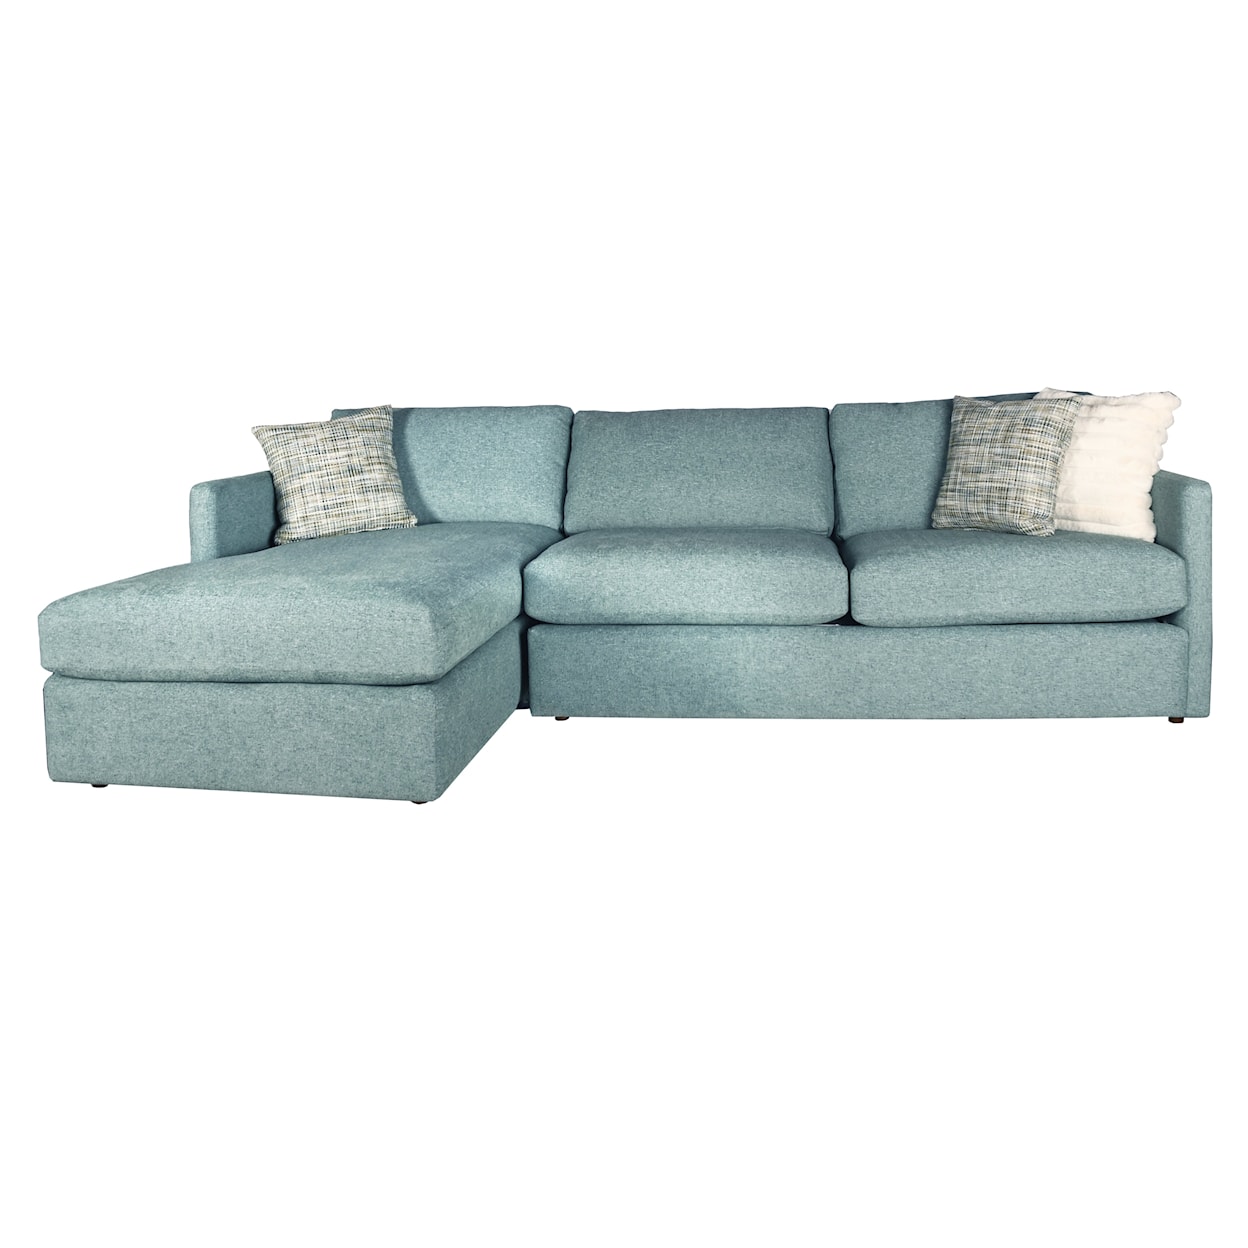 Taelor Designs Tess 2 Pc. Sectional